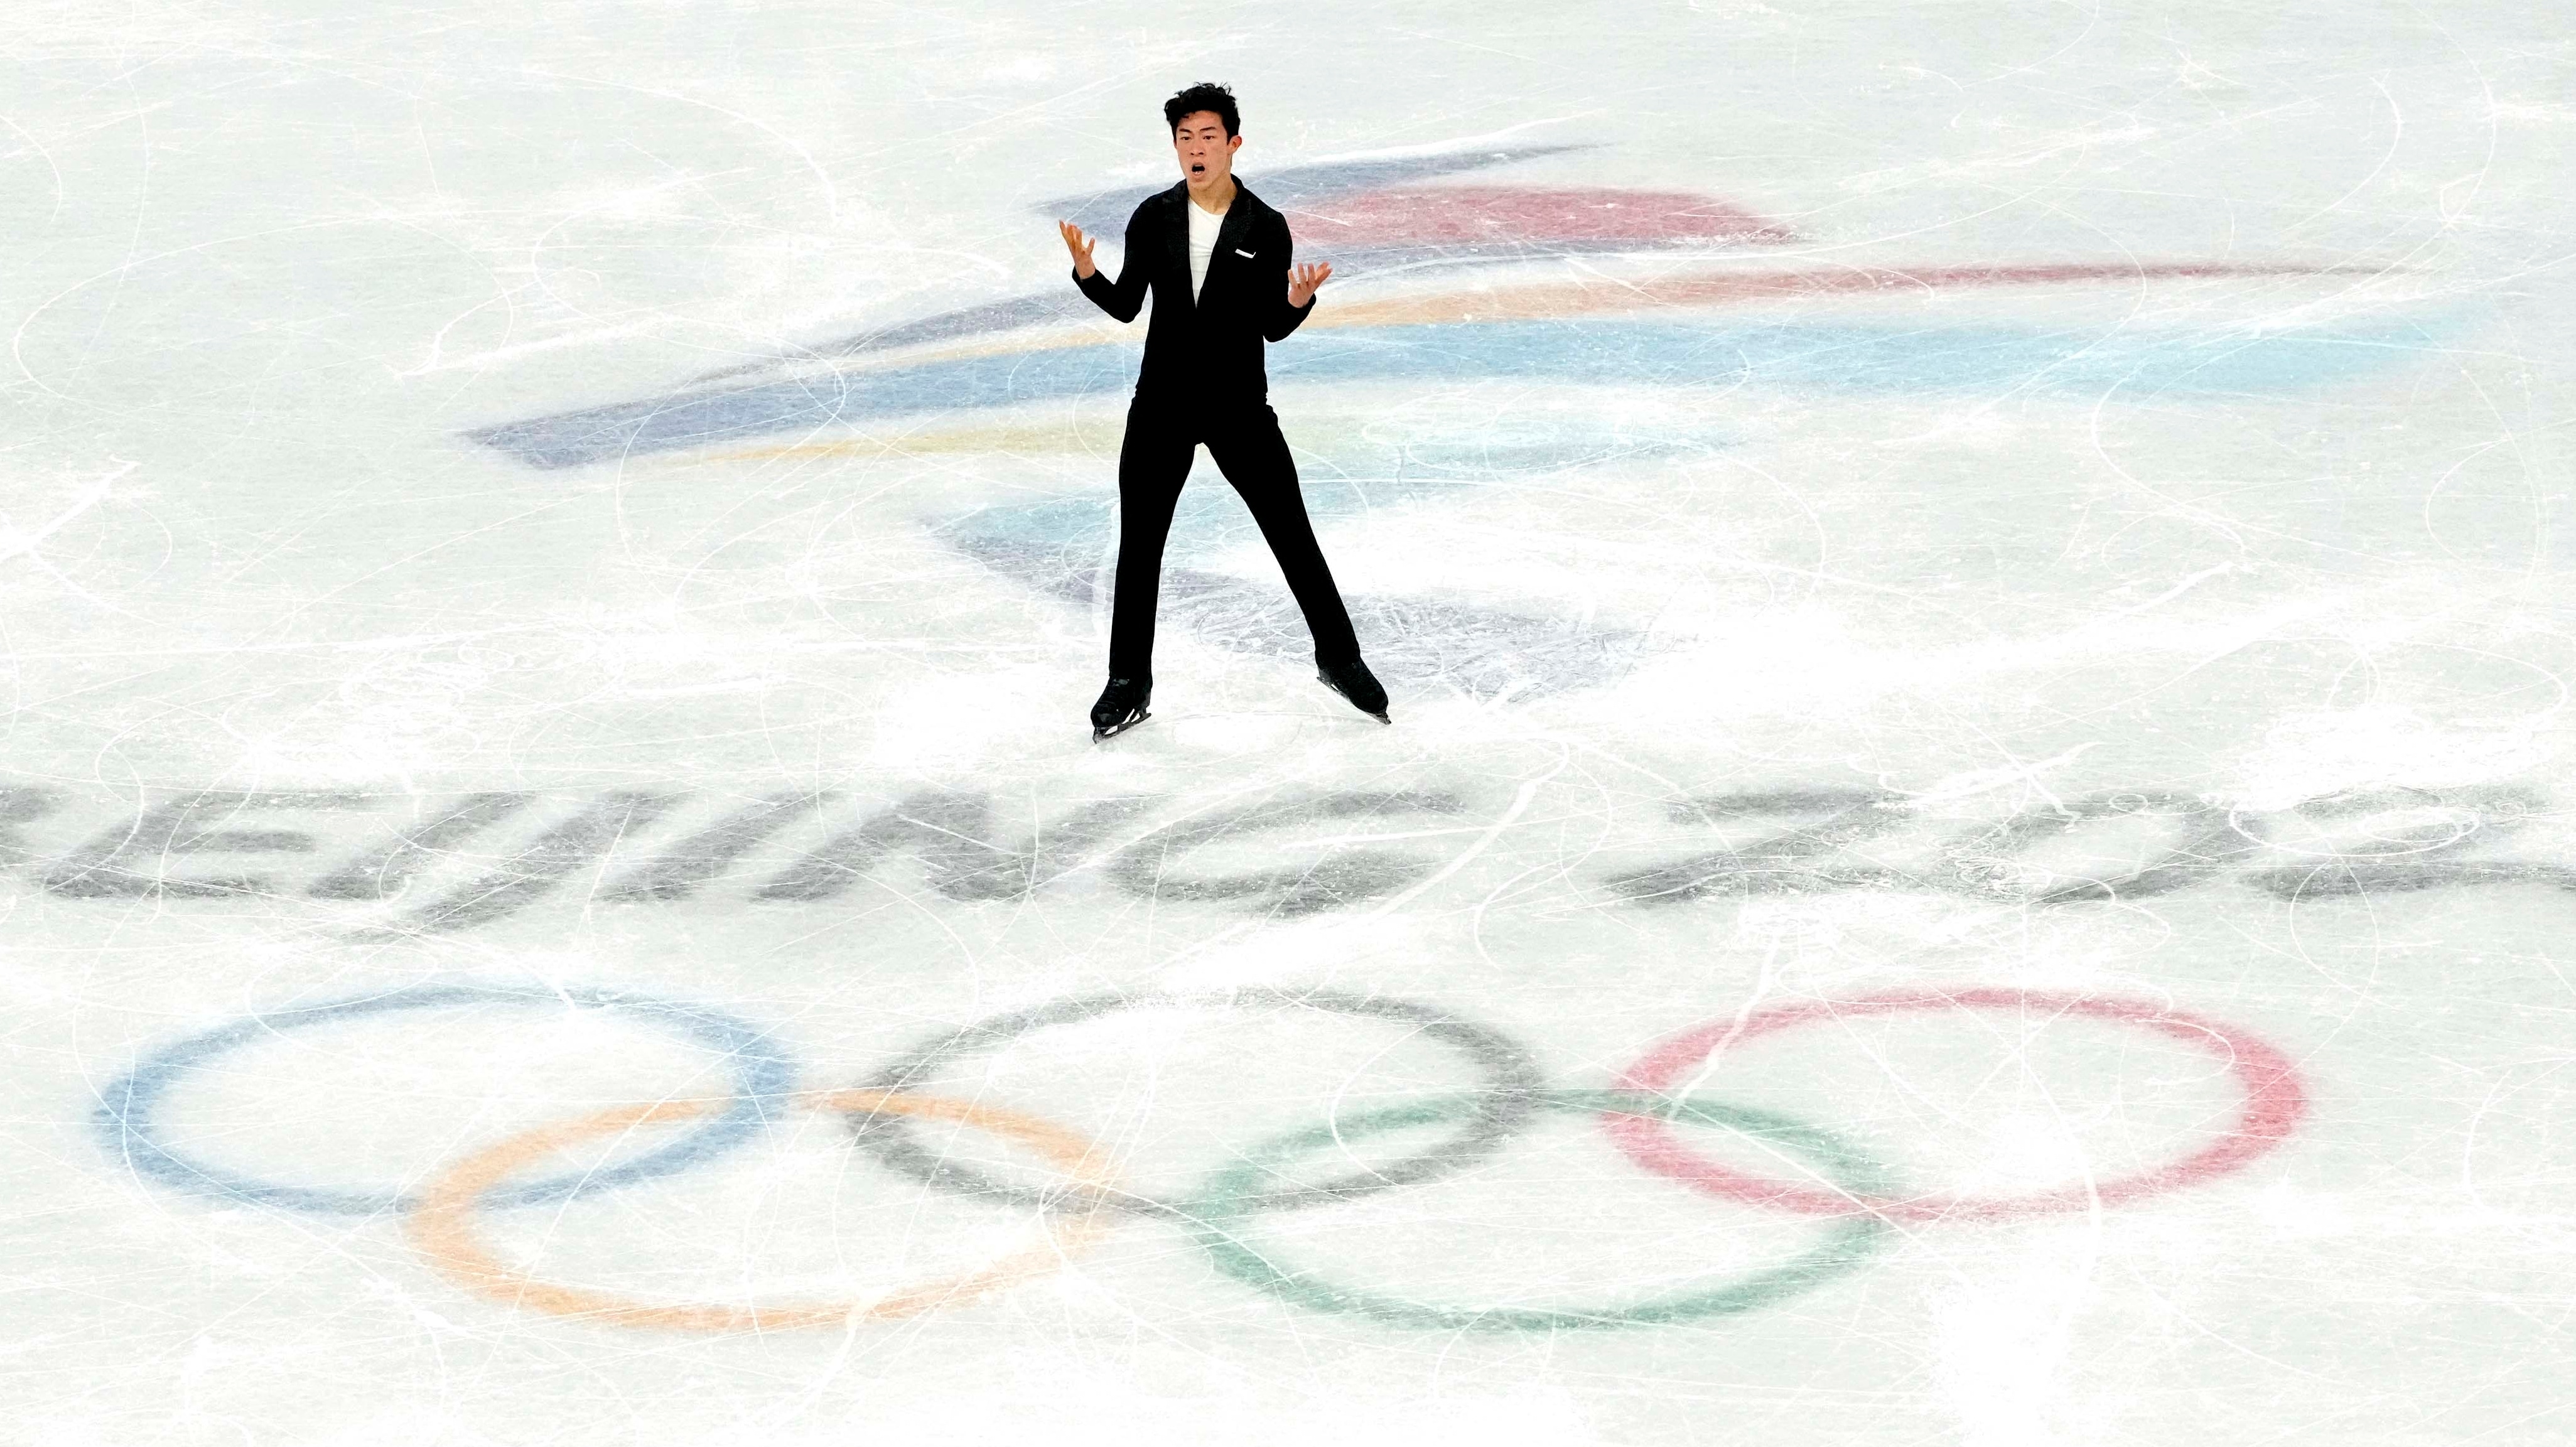 Nathan Chen records second-highest short program score ever at 2022 Winter Olympics